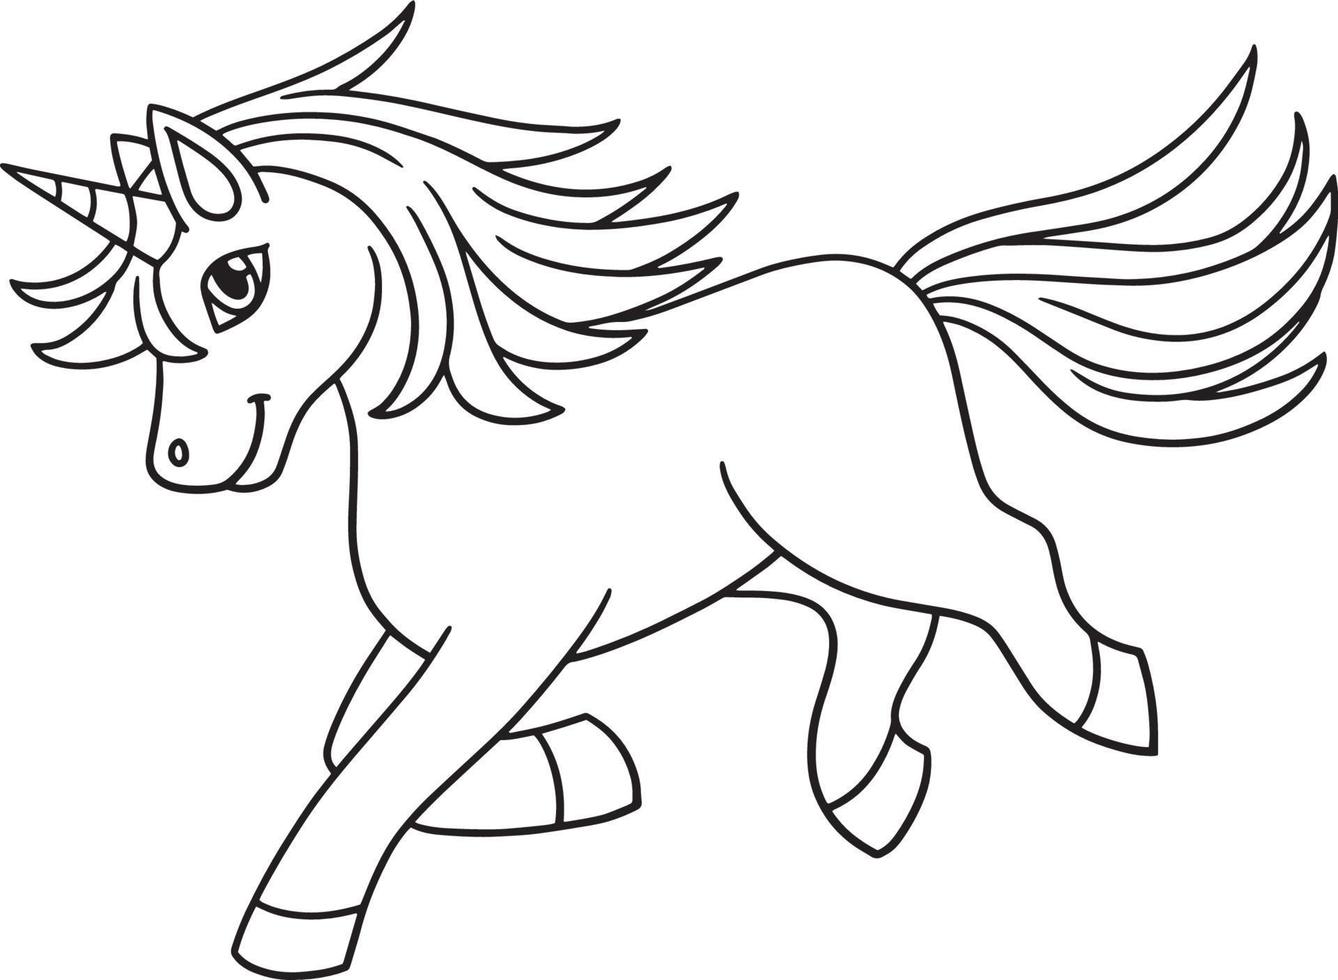 Unicorn Running Isolated Coloring Page for Kids vector